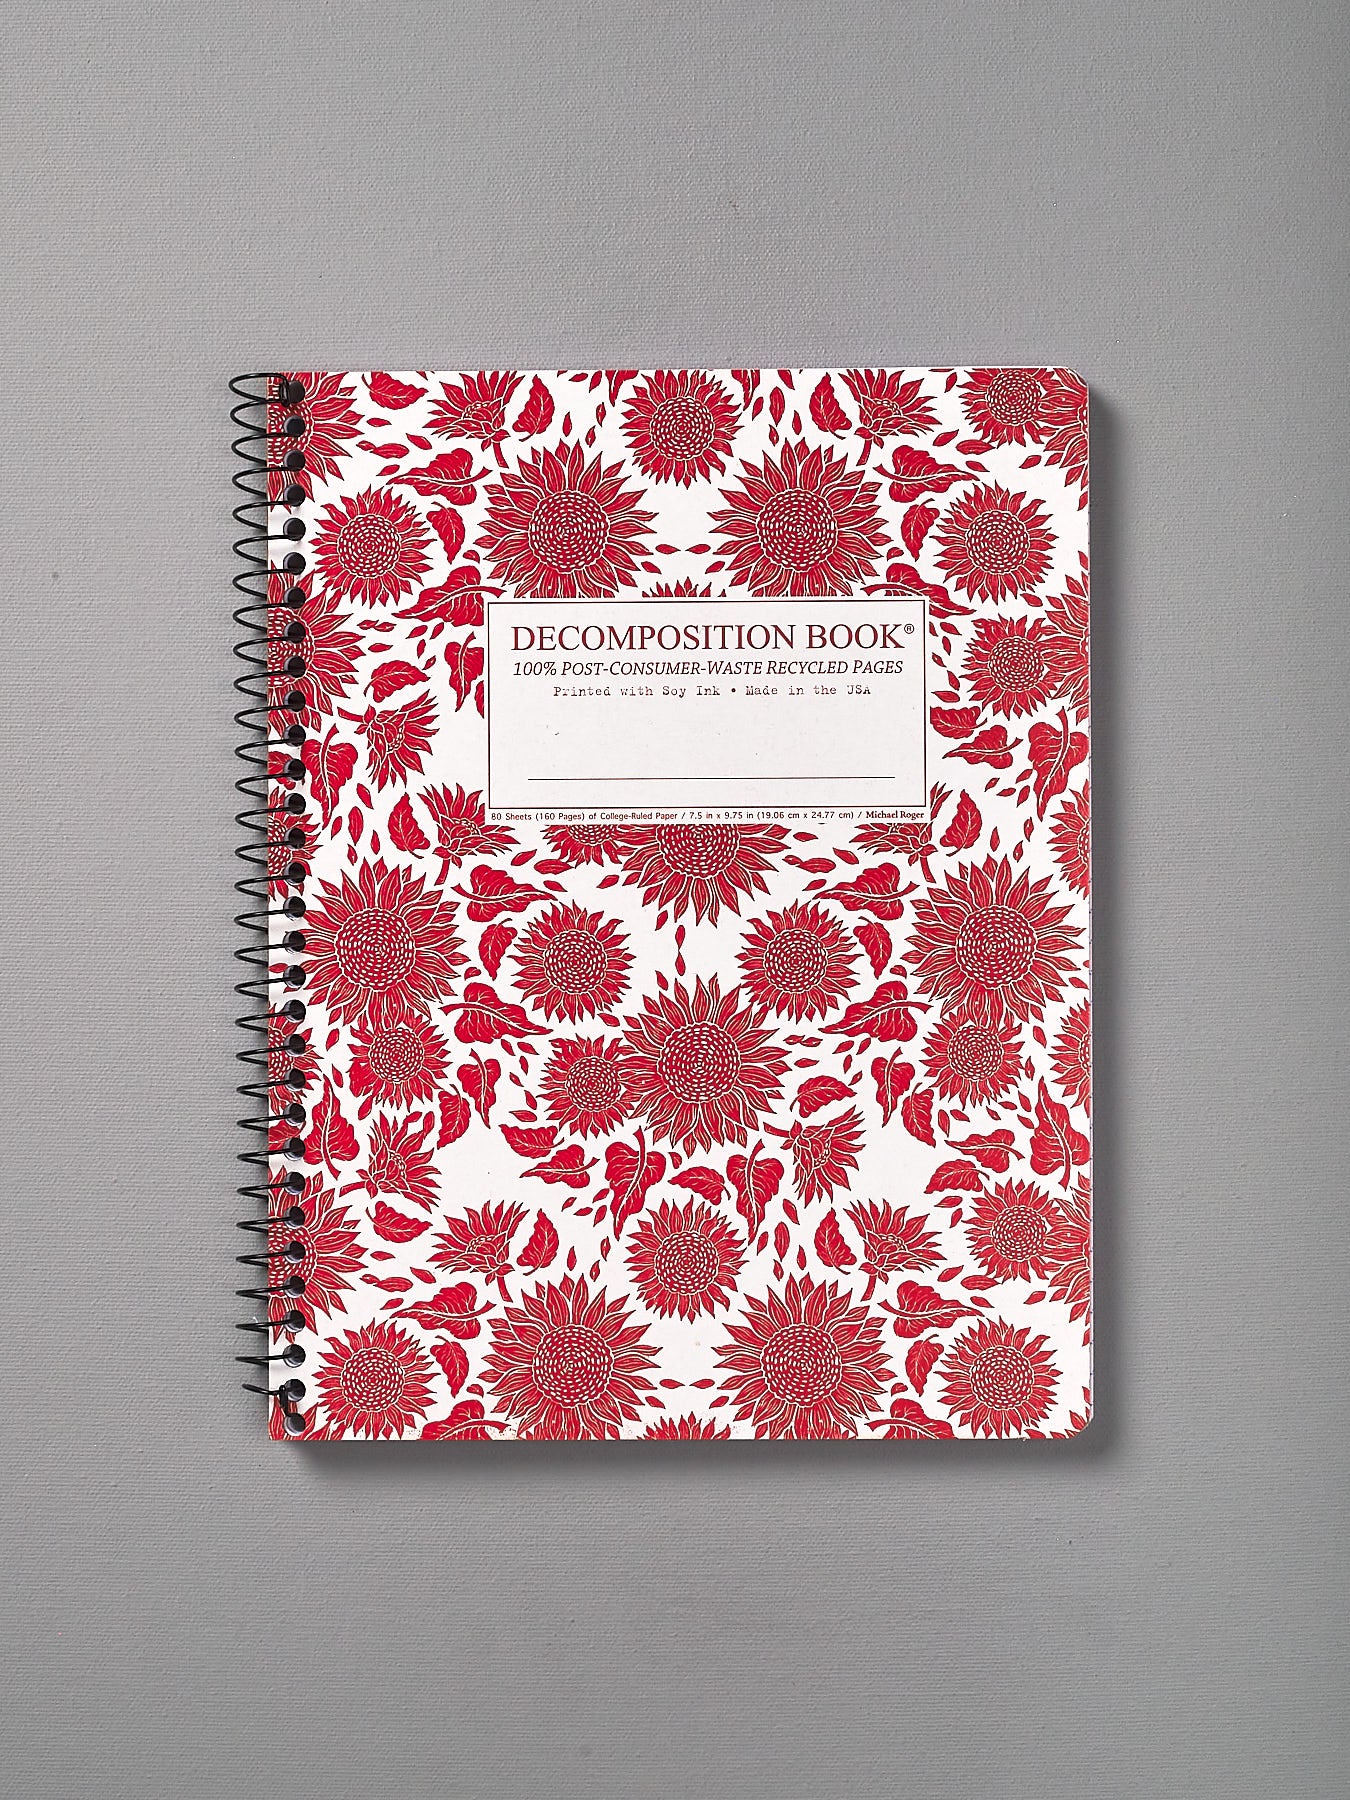 A Decomposition Recycled Notebook – Large/Ruled (Sunflowers) with red and white flowers on it.